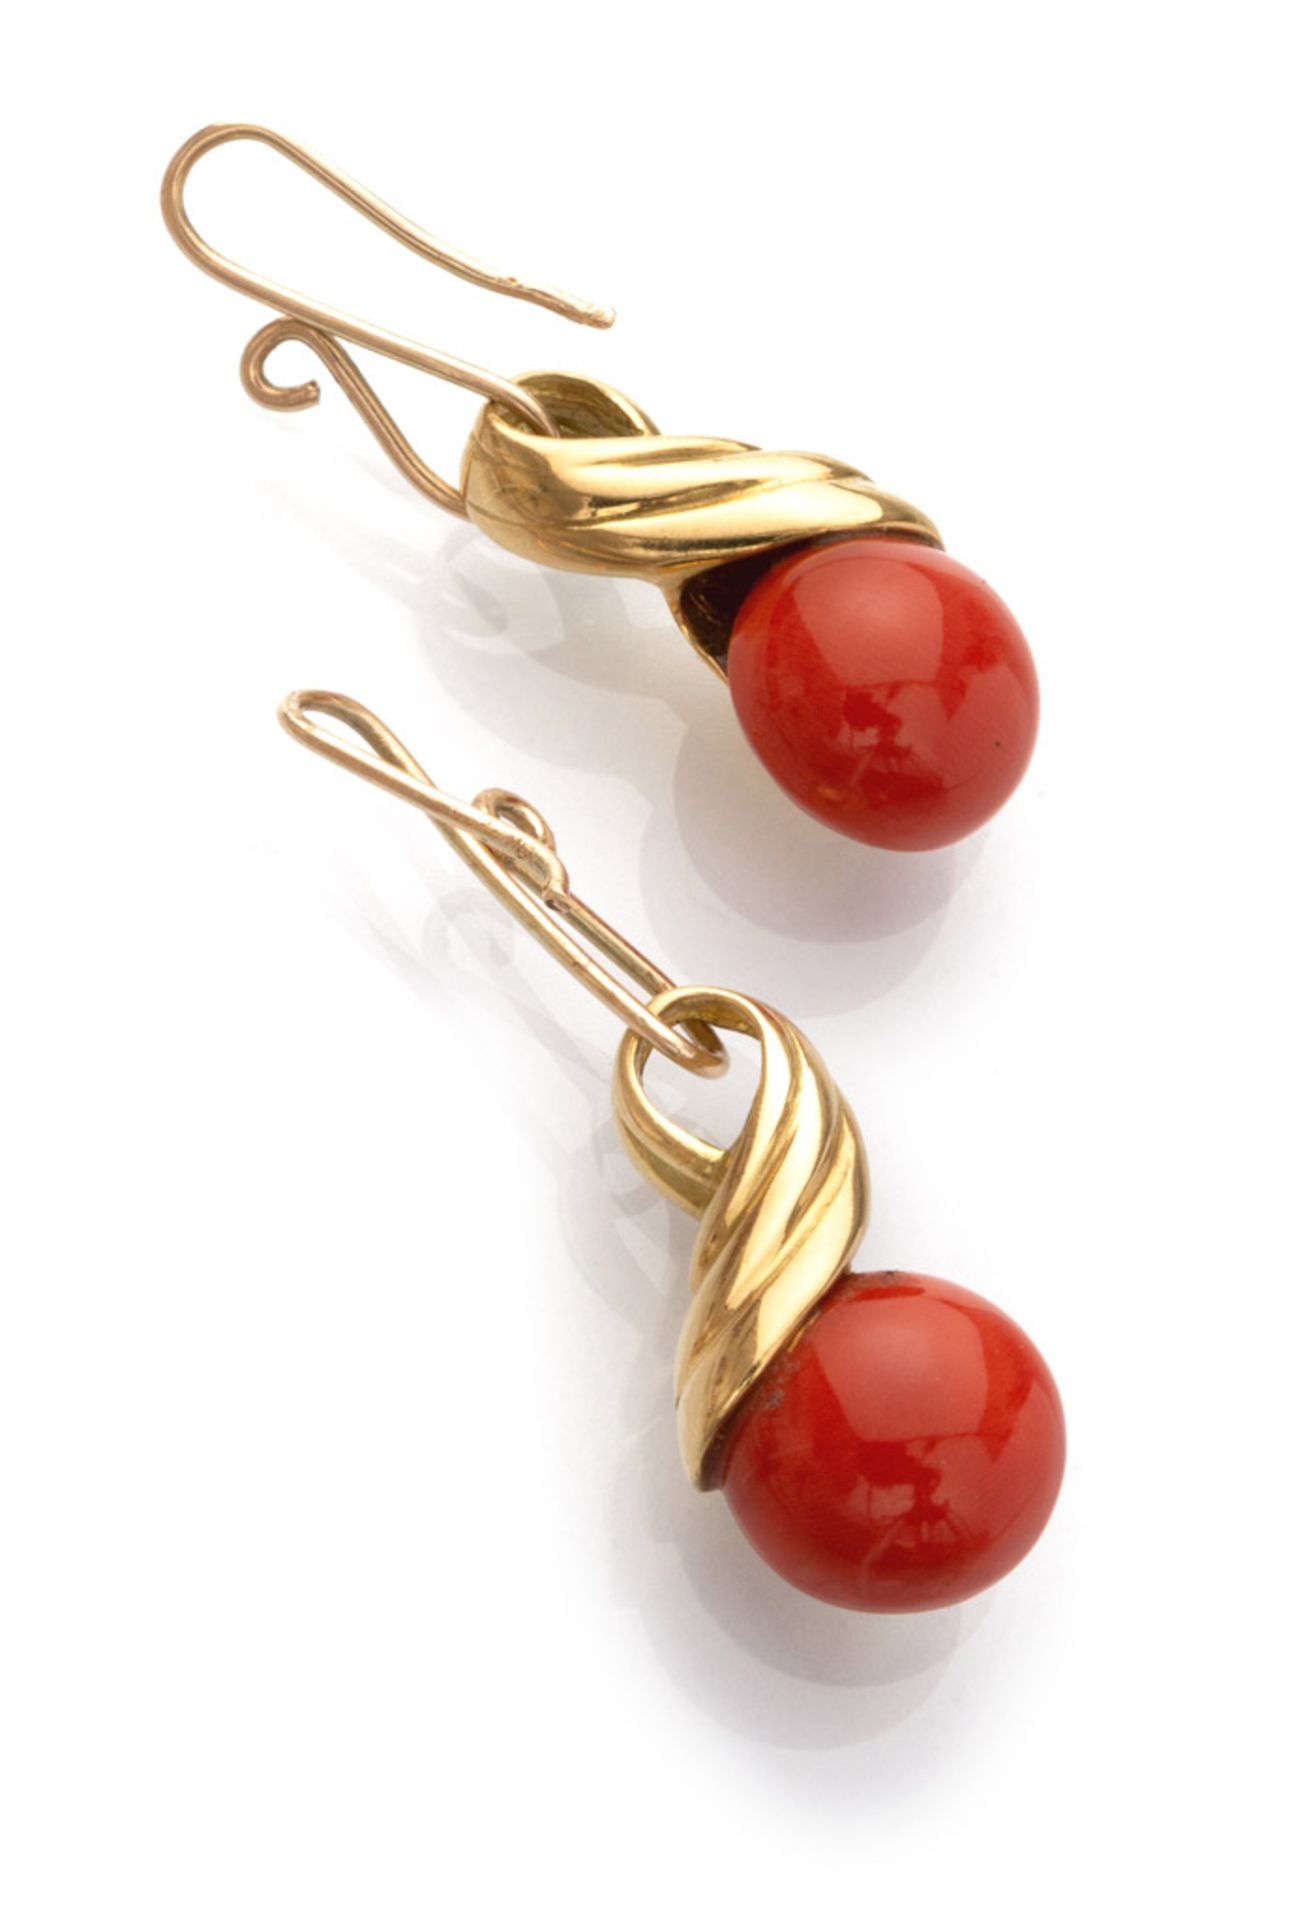 PAIR OF EARRINGS POMPEIAN STYLE in yellow gold 18 kts., with pendants in red coral. Length cm. 4,